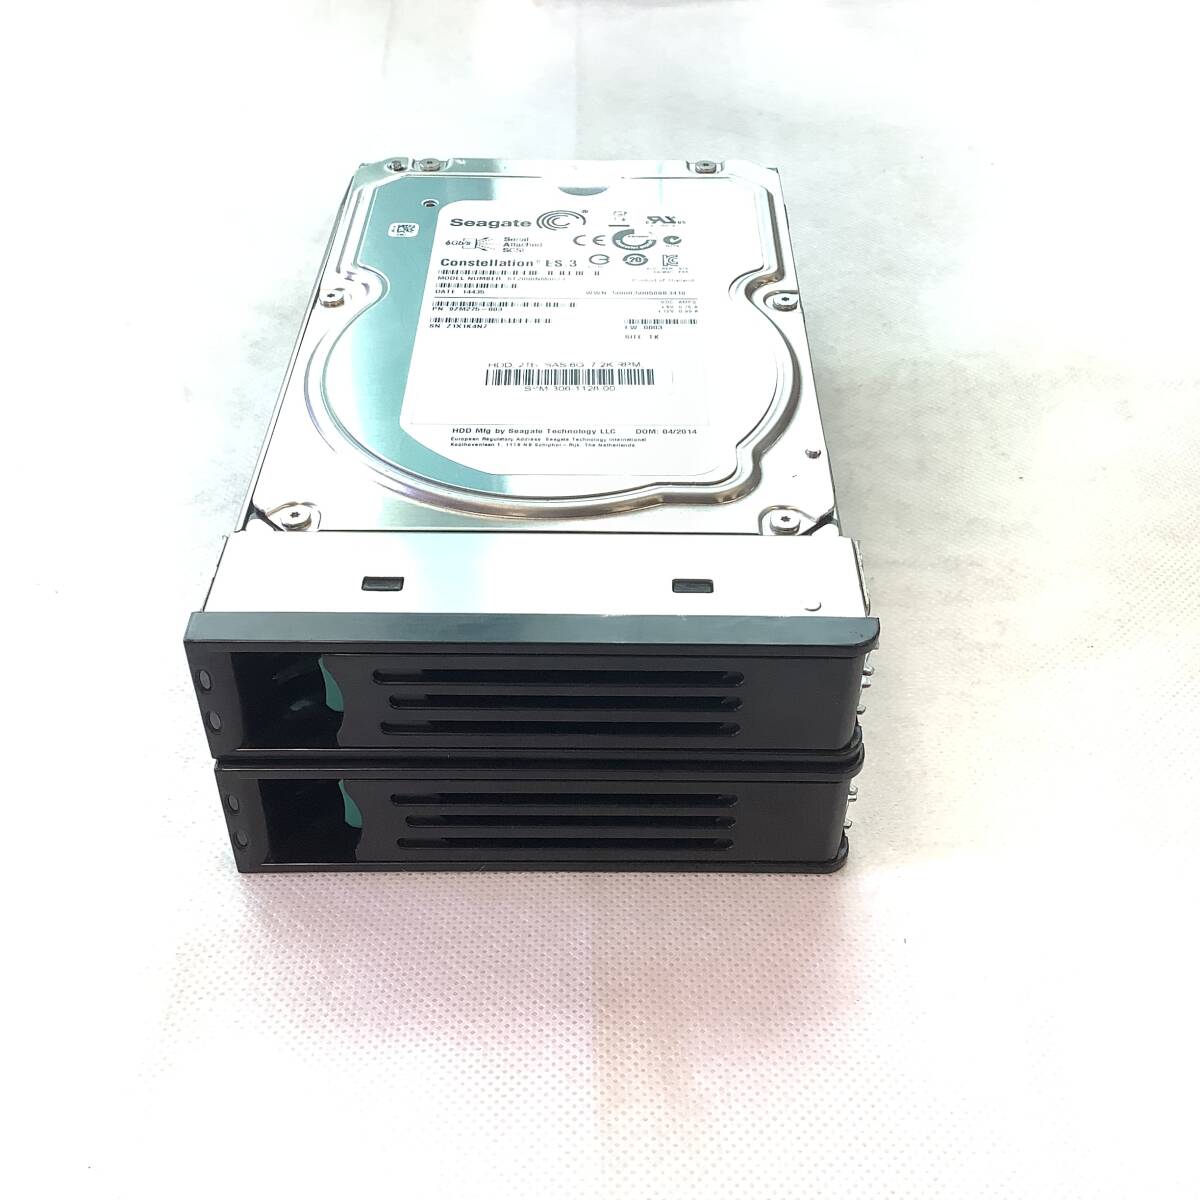 S6042560 Seagate 2TB SAS 7.2K 3.5 -inch HDD 2 point [ used operation goods ]